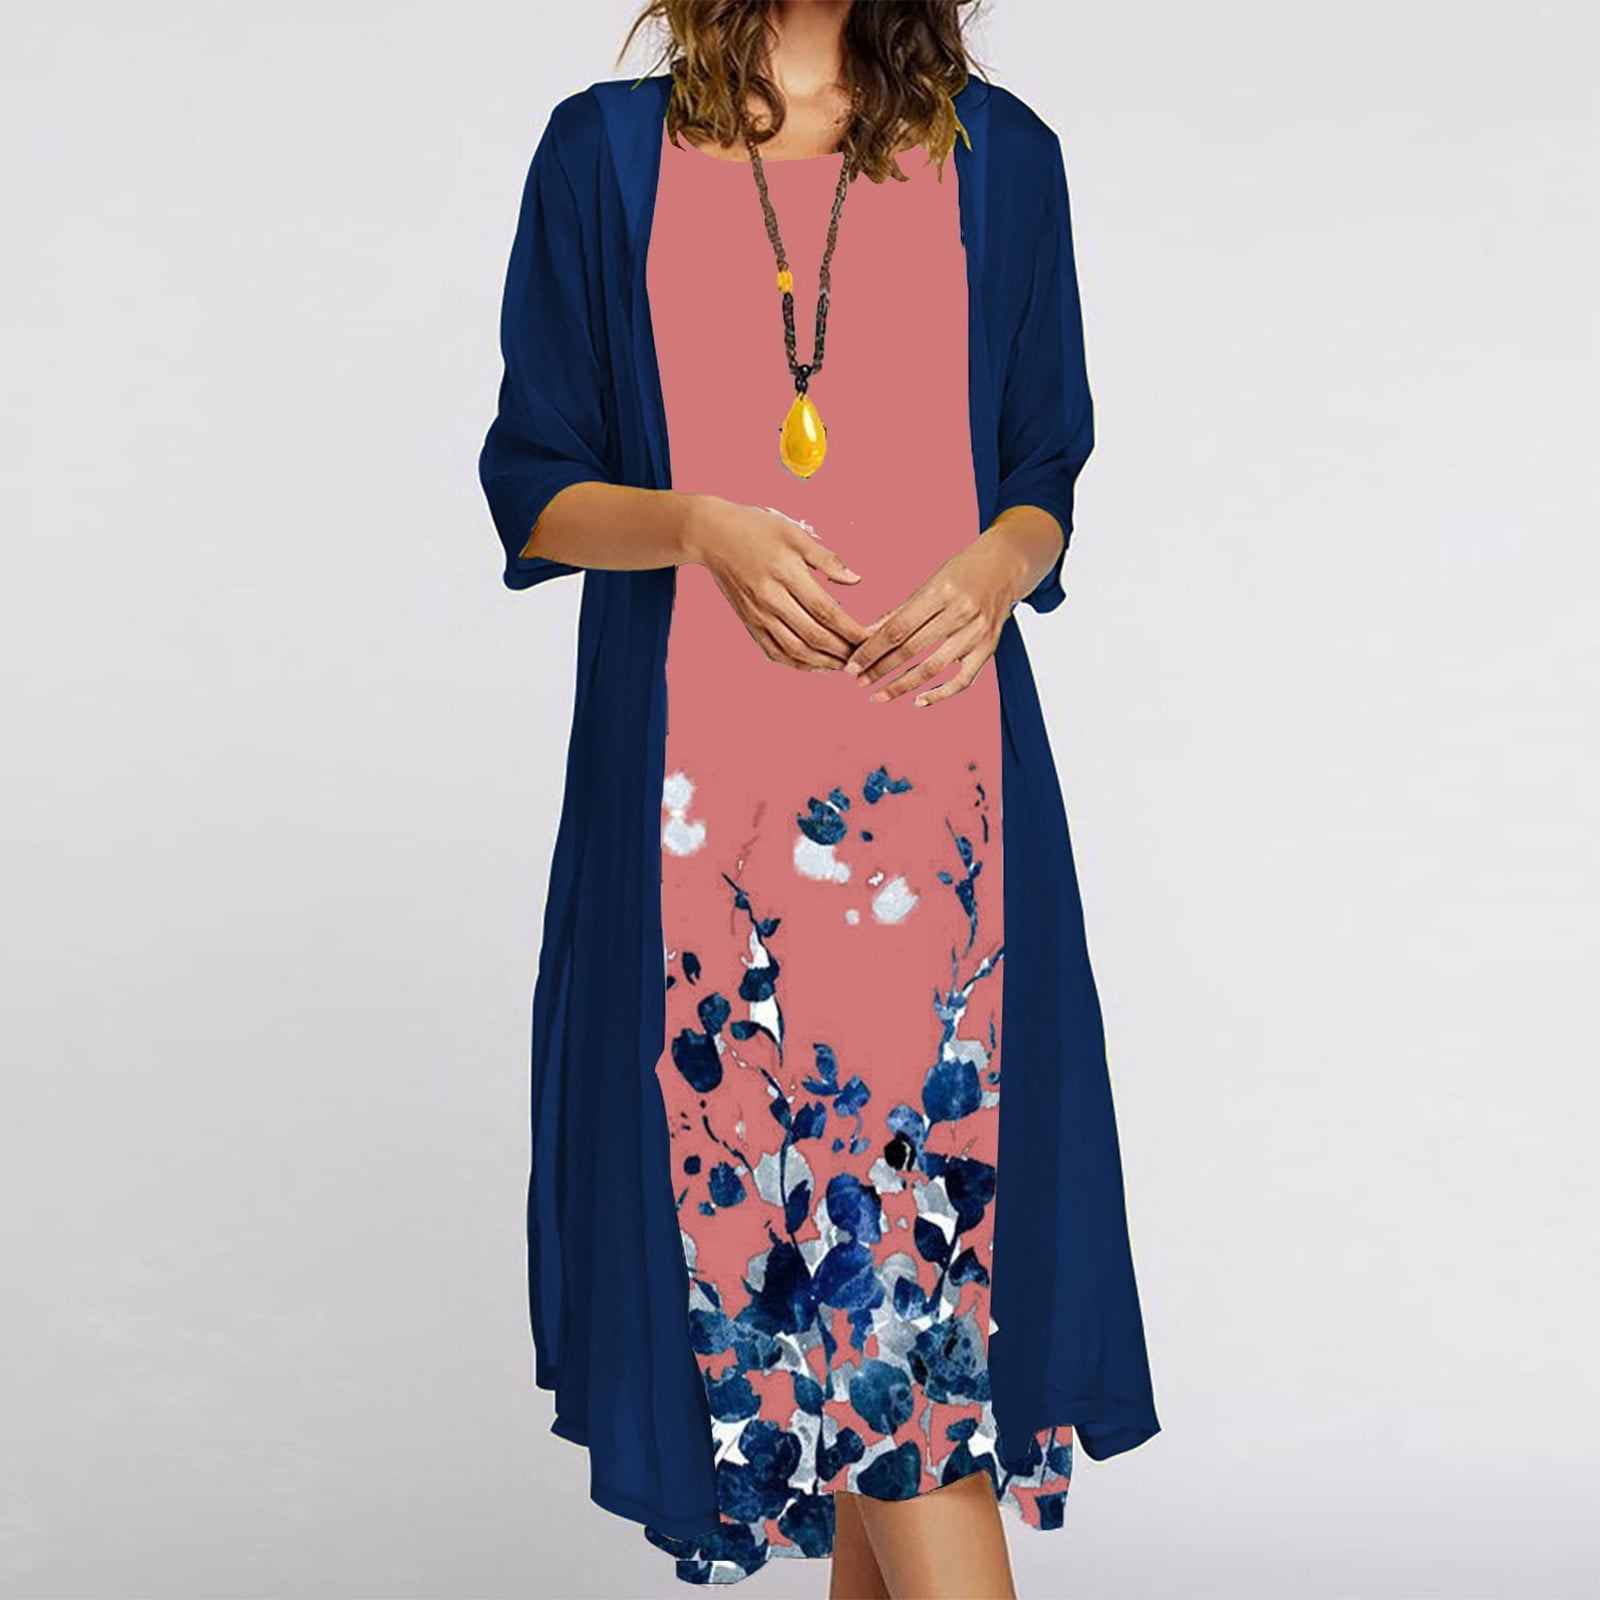 Women Dresses For Church Church Outfits For Women Ladies Dresses For ...